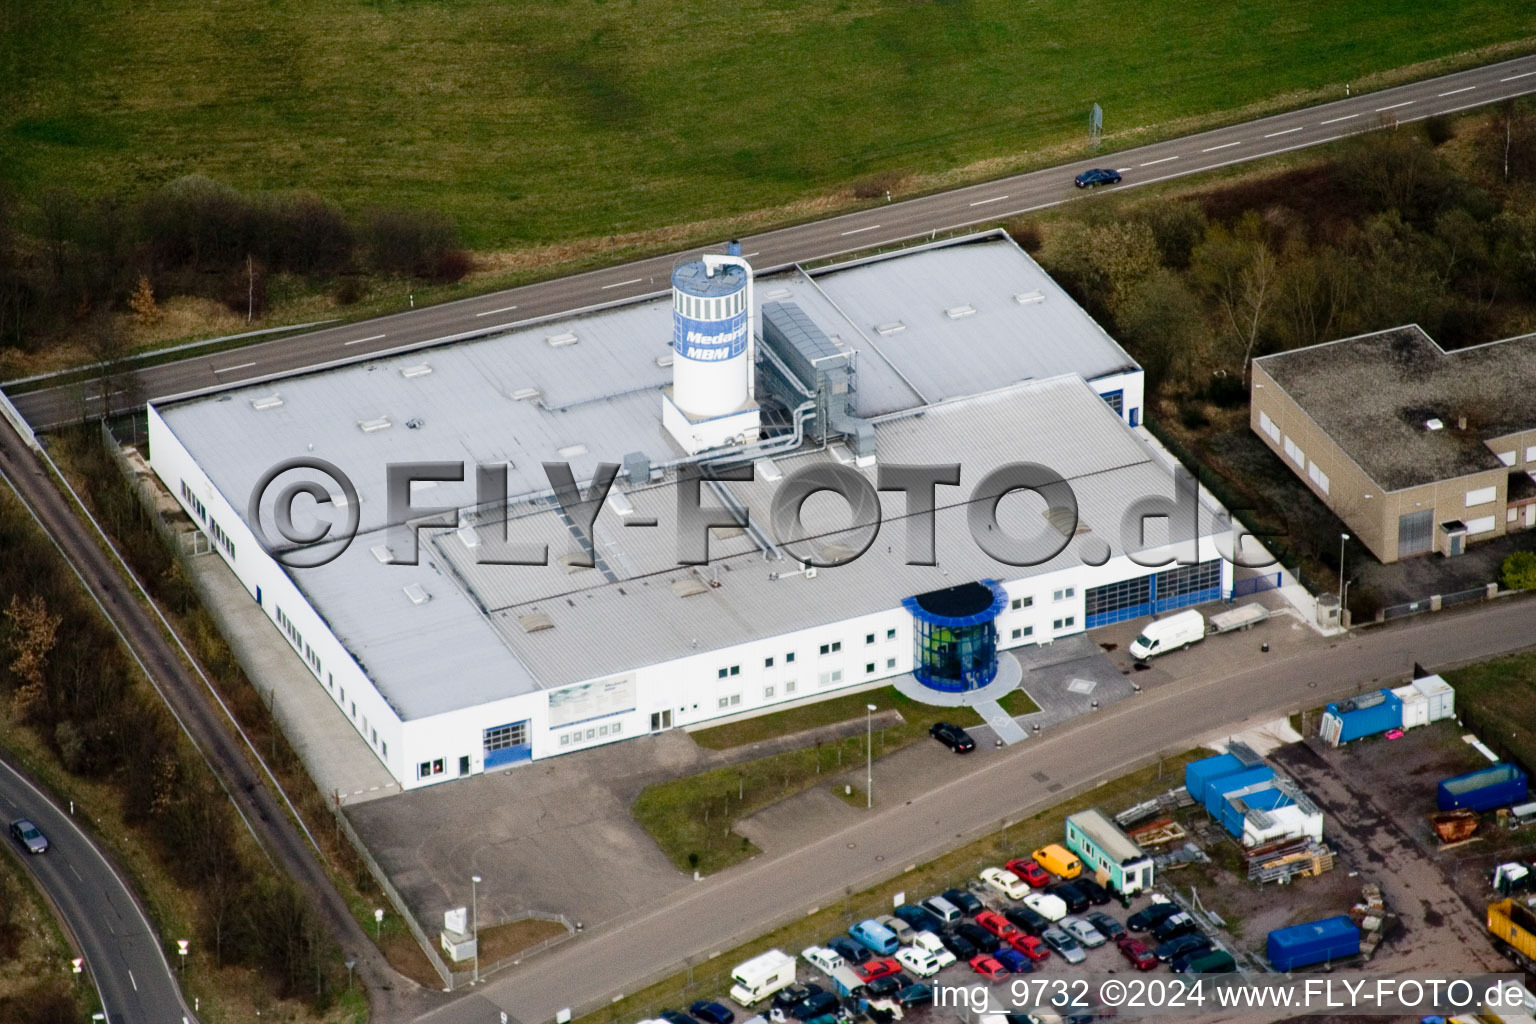 Aerial photograpy of Offenbach an der Queich in the state Rhineland-Palatinate, Germany